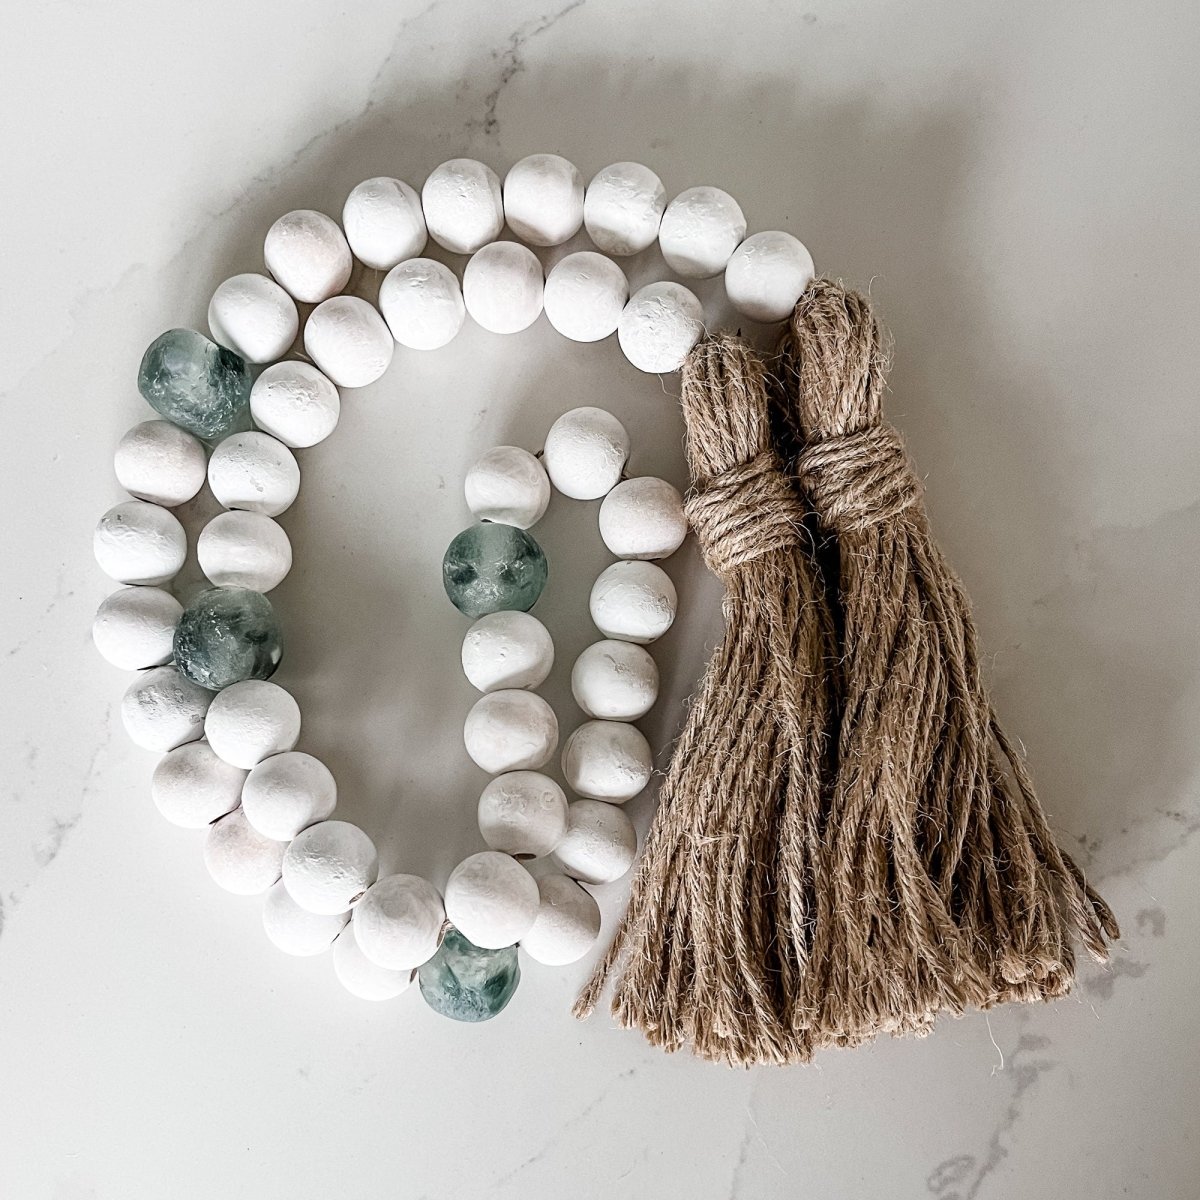 Whitewashed Wood Bead Garland with Jumbo Gray Recycled Glass Beads - sonder and wolf